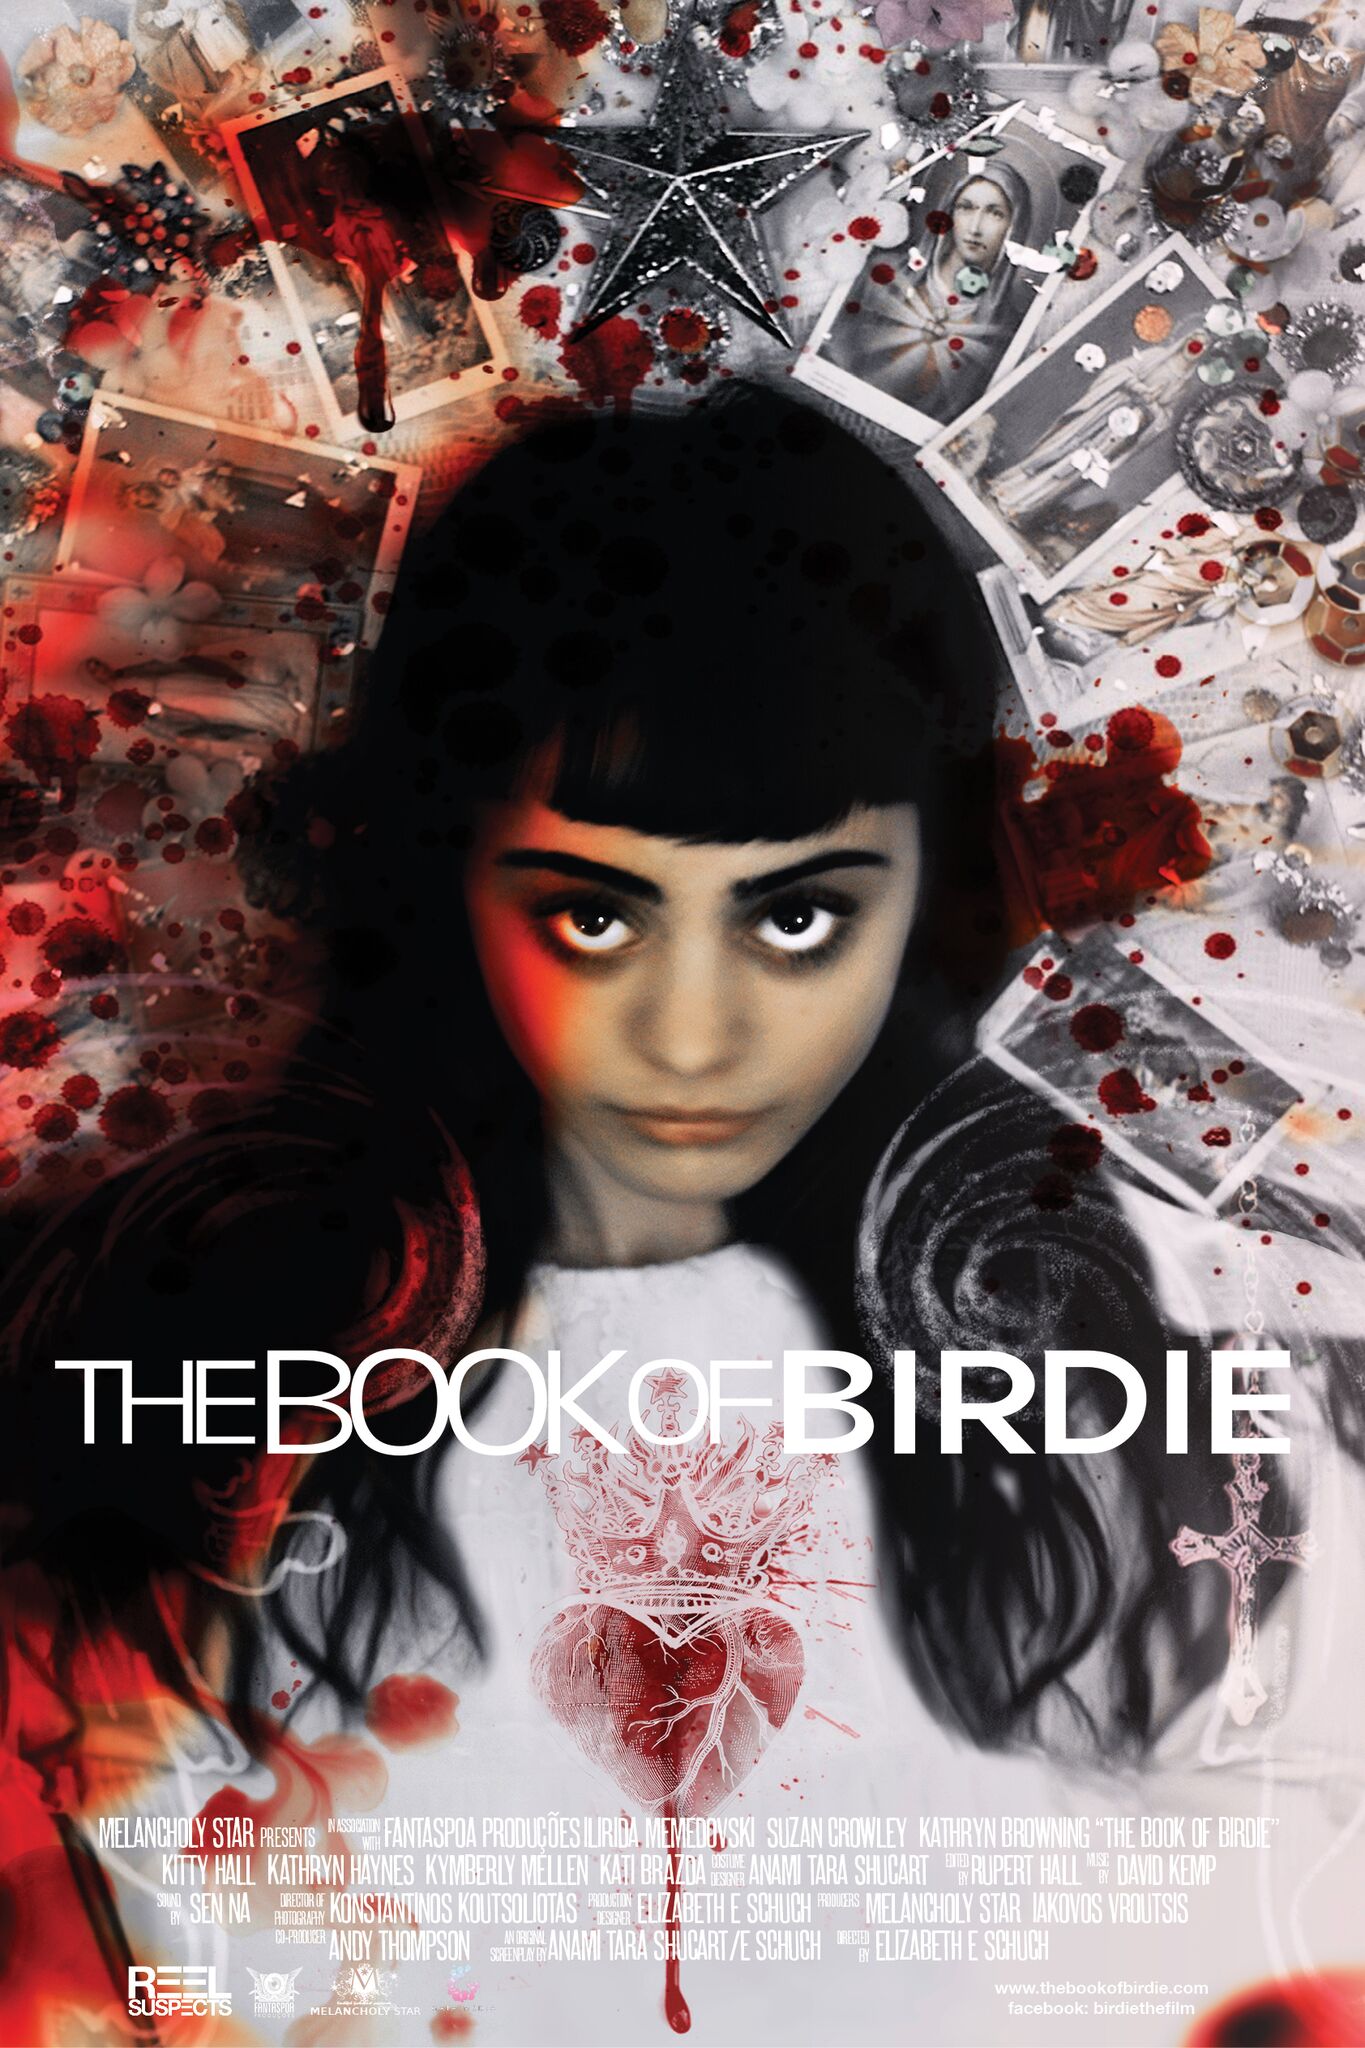 The Book Of Birdie film review: an artful and unusual fairytale